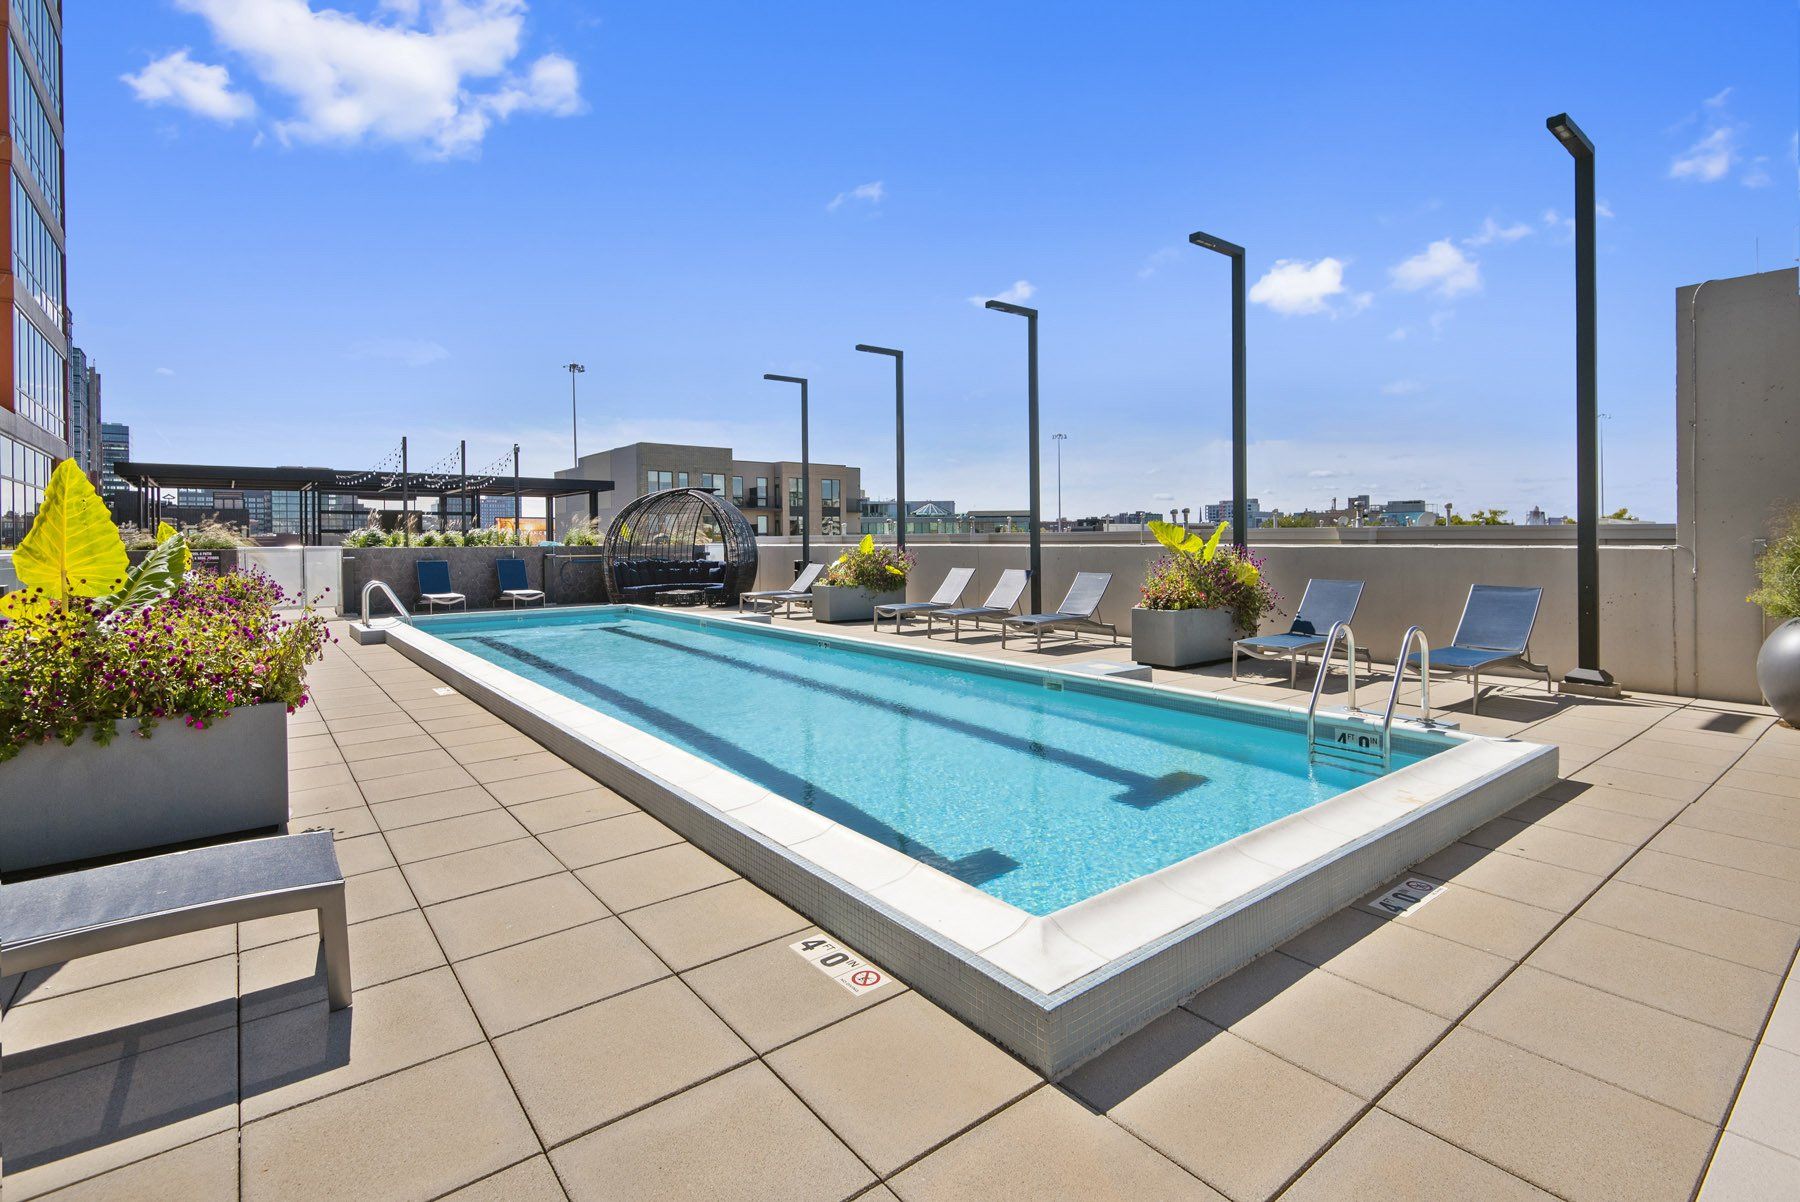 Pool with lounge chairs at Reside on Green Street.